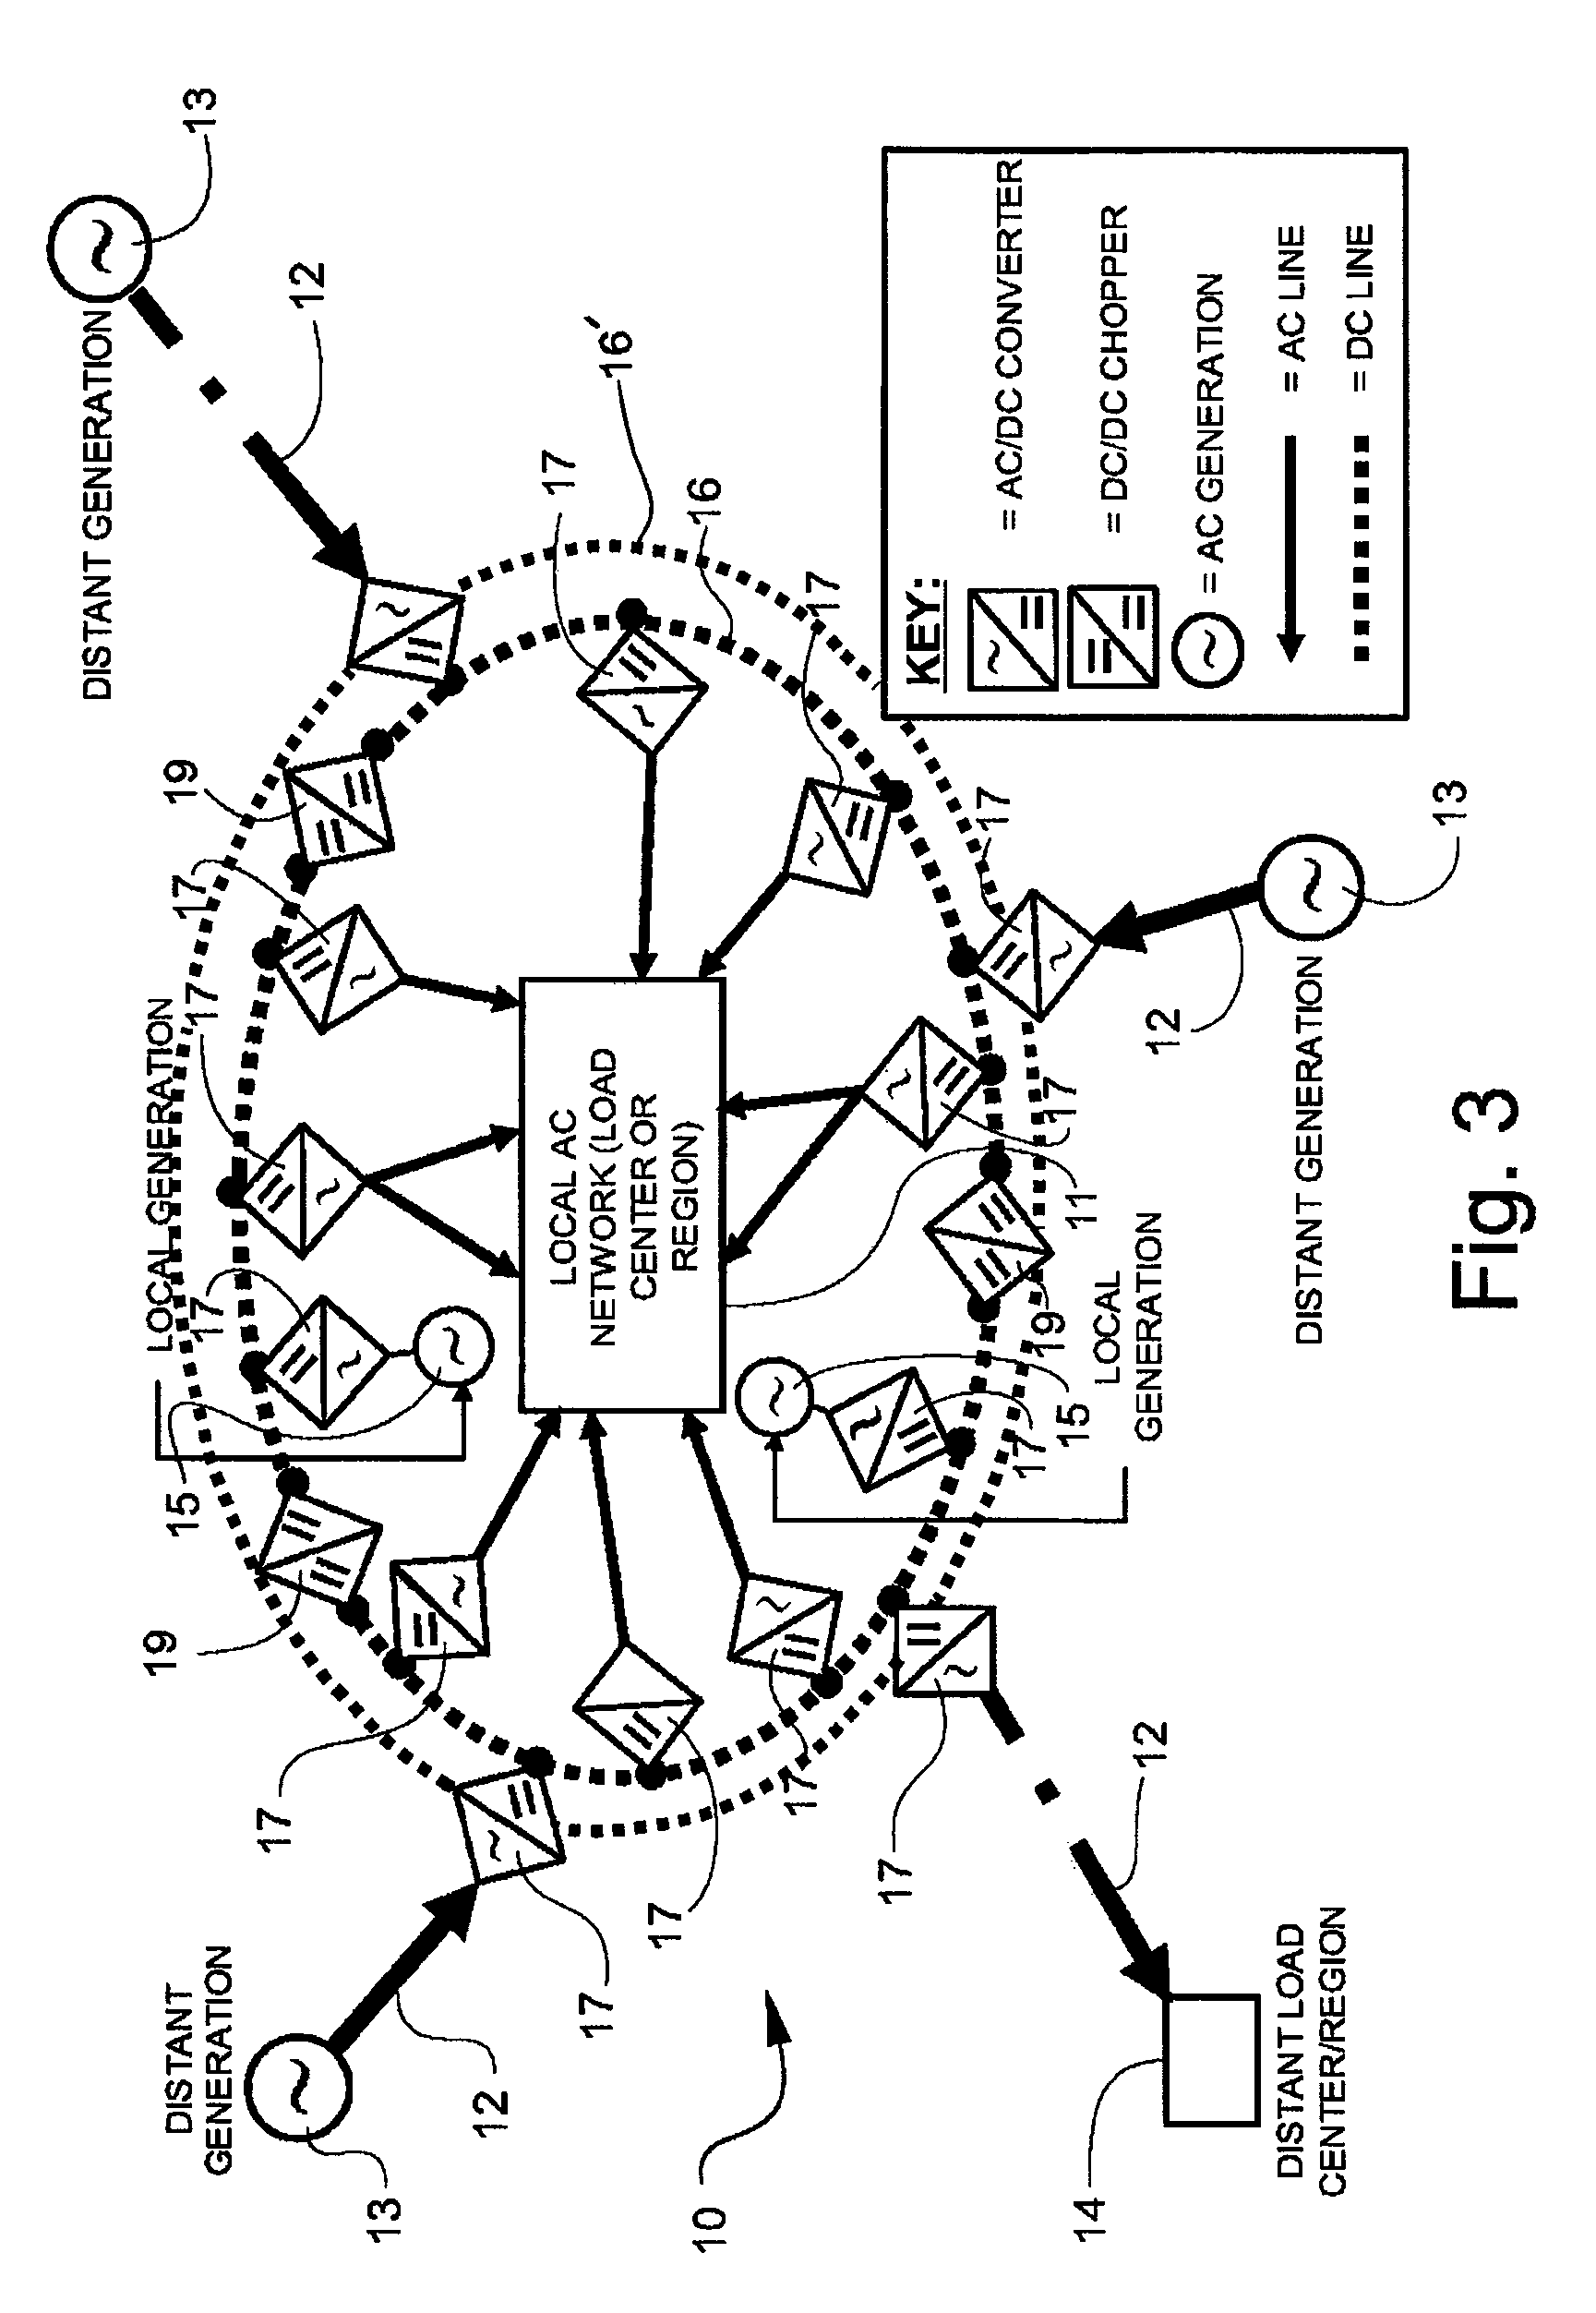 Method and apparatus for improving AC transmission system dispatchability, system stability, and power flow controllability using DC transmission systems